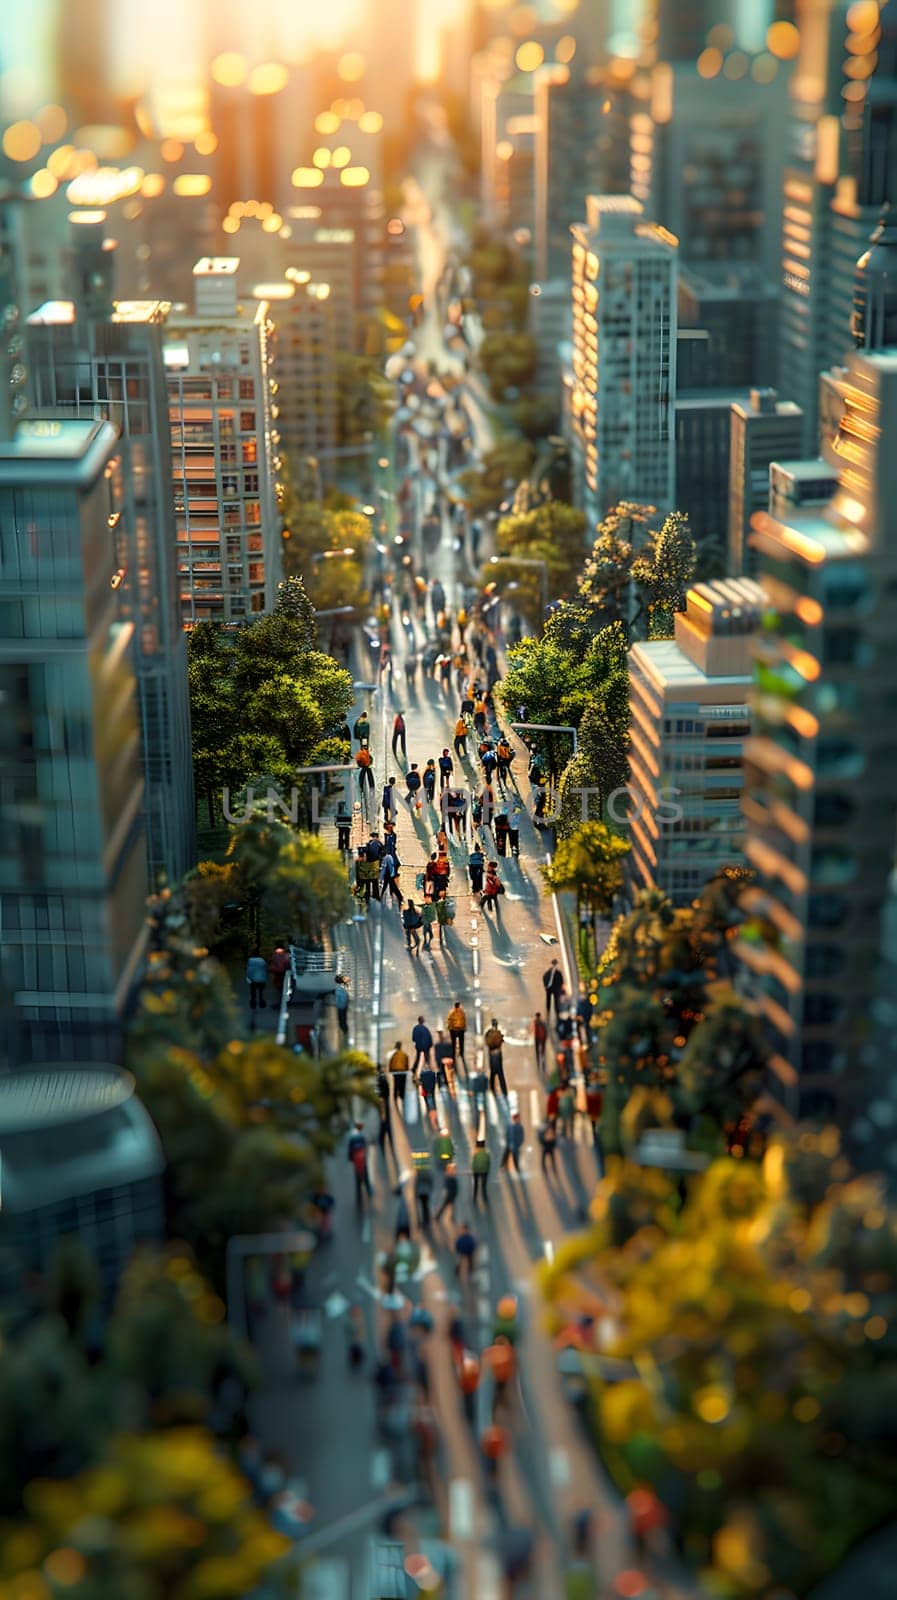 An aerial view of a crowd of people walking down a city street surrounded by skyscrapers and residential buildings in an urban design neighborhood